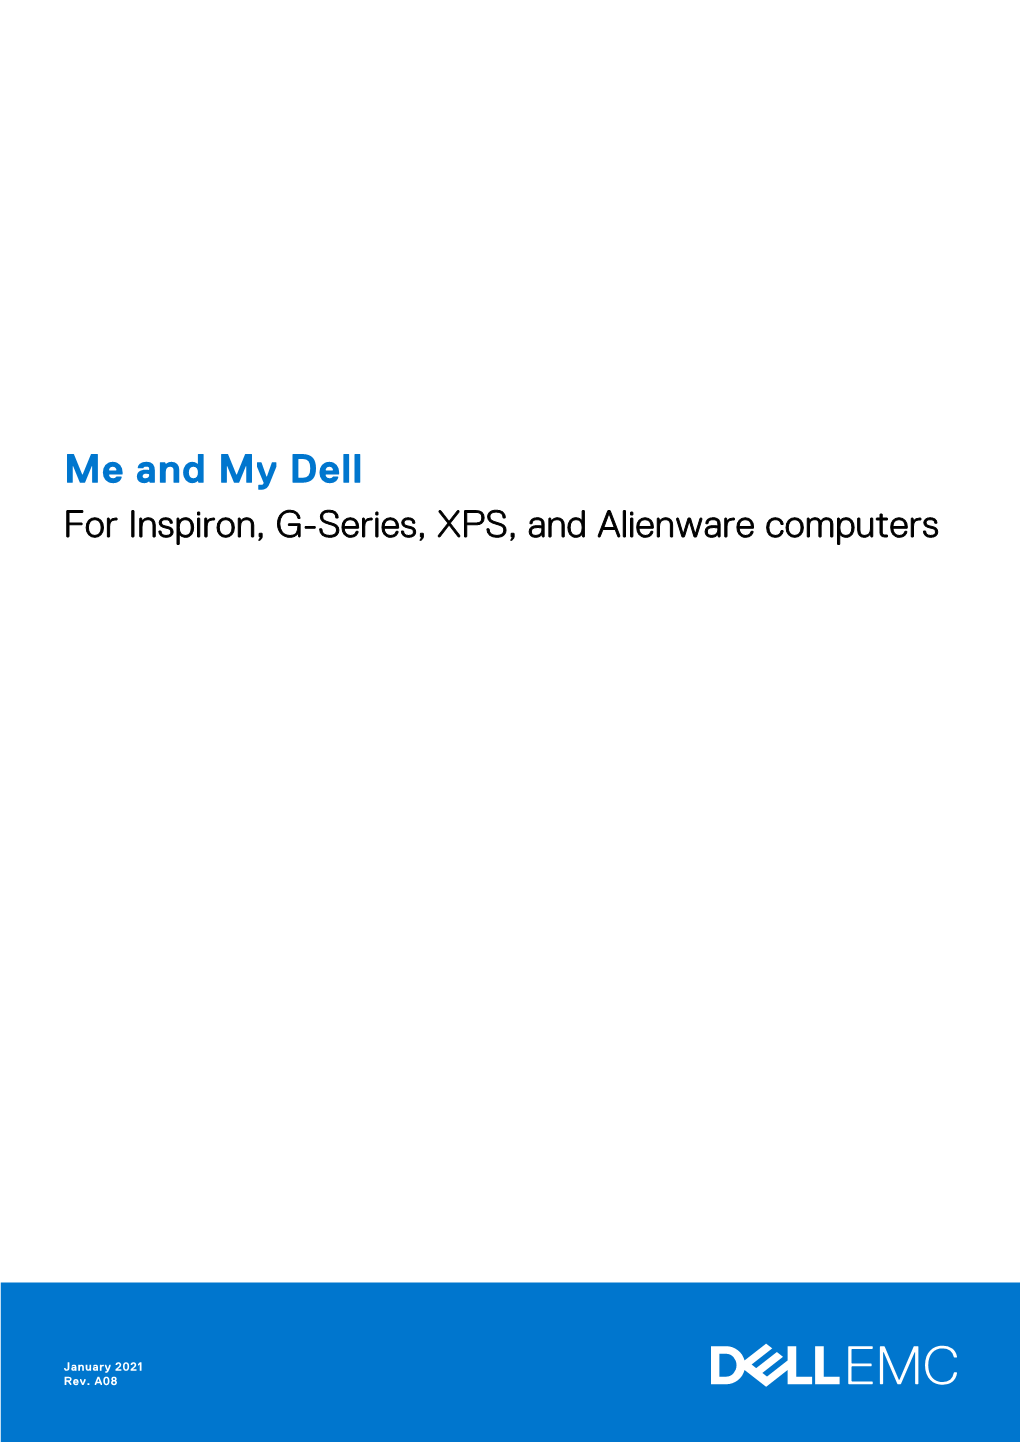 Me and My Dell for Inspiron, G-Series, XPS, and Alienware Computers